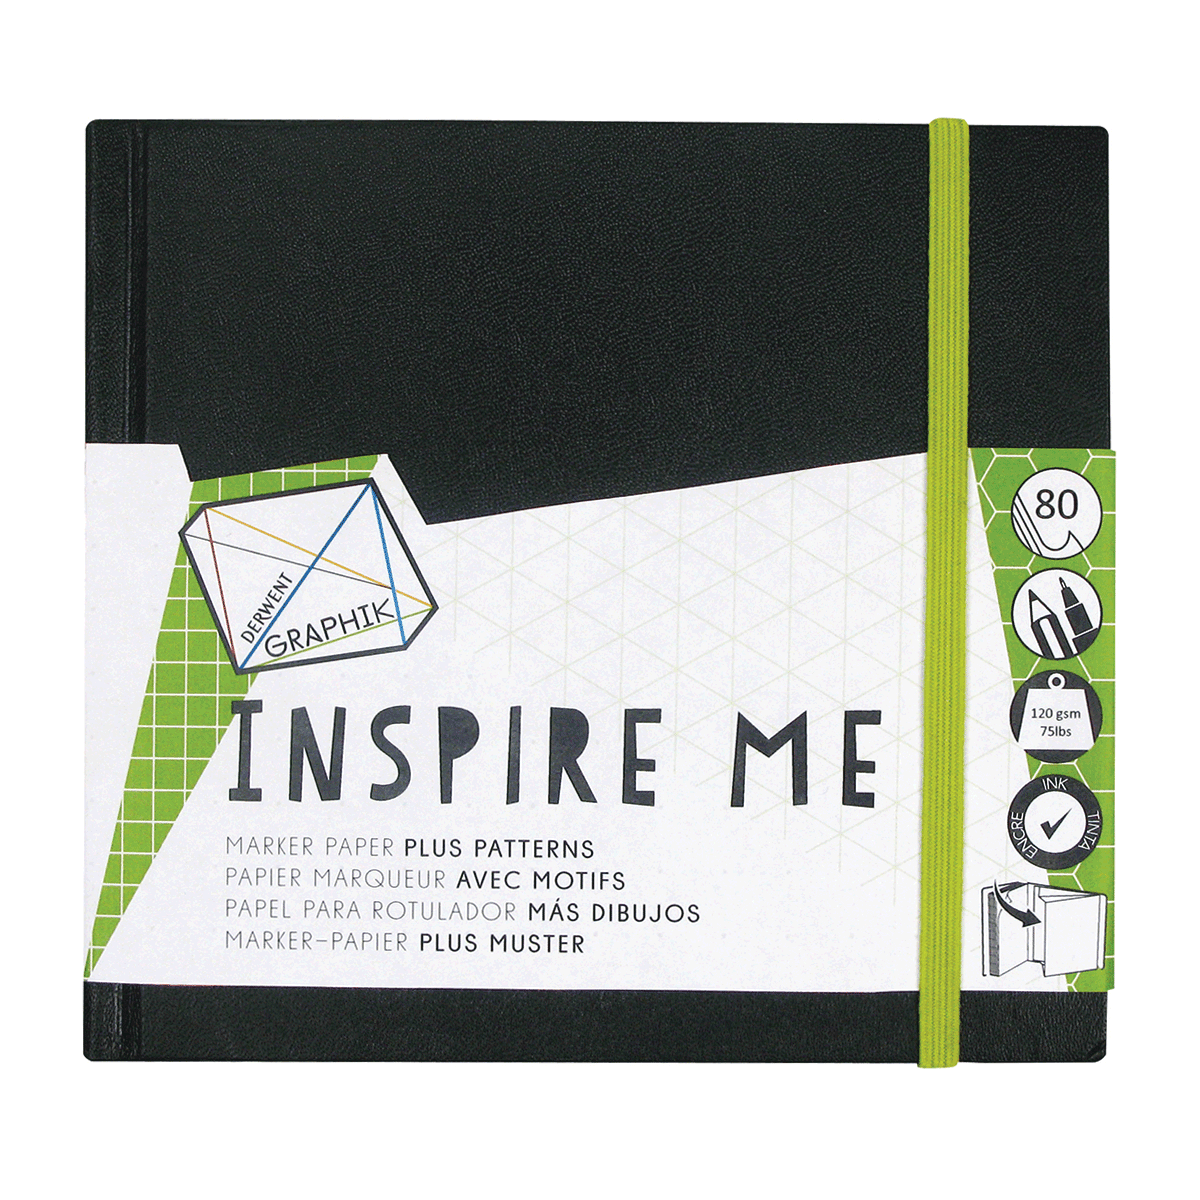 Derwent Graphik Inspire Me Book - Small 5.5 x 5.5 inches